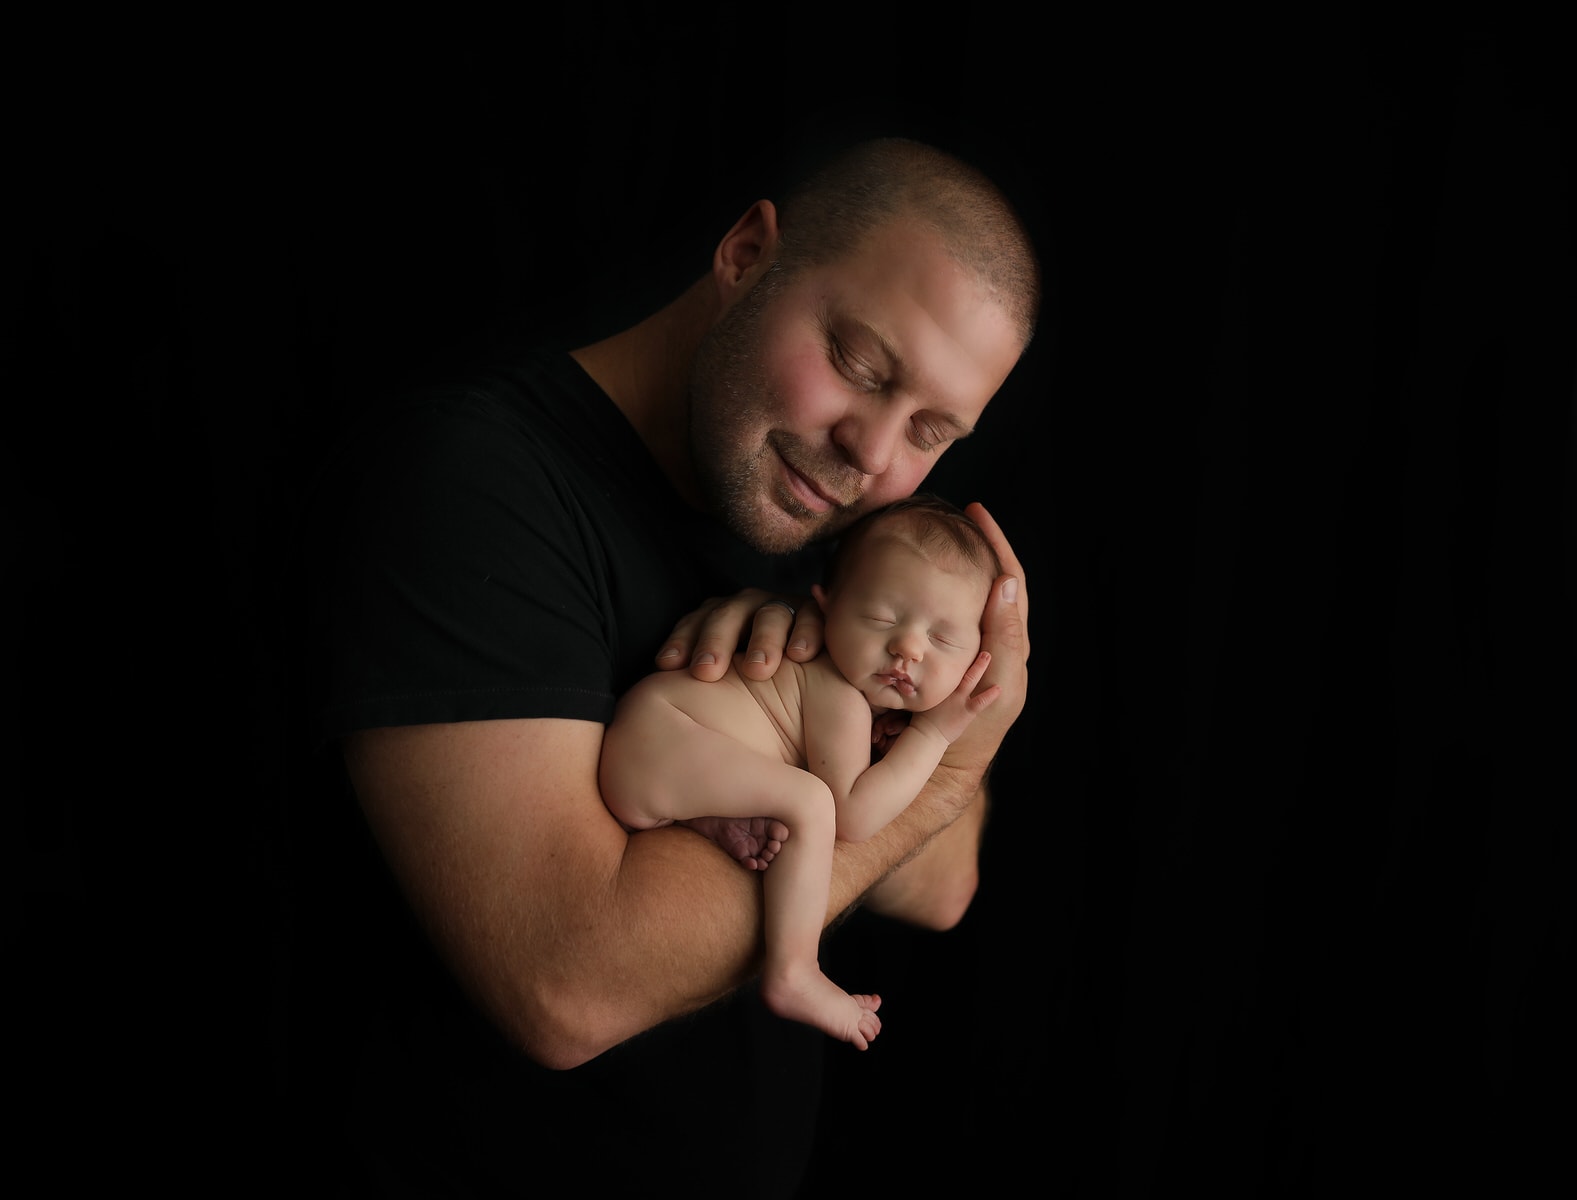 dad poses with newborn baby girl during newborn photography session